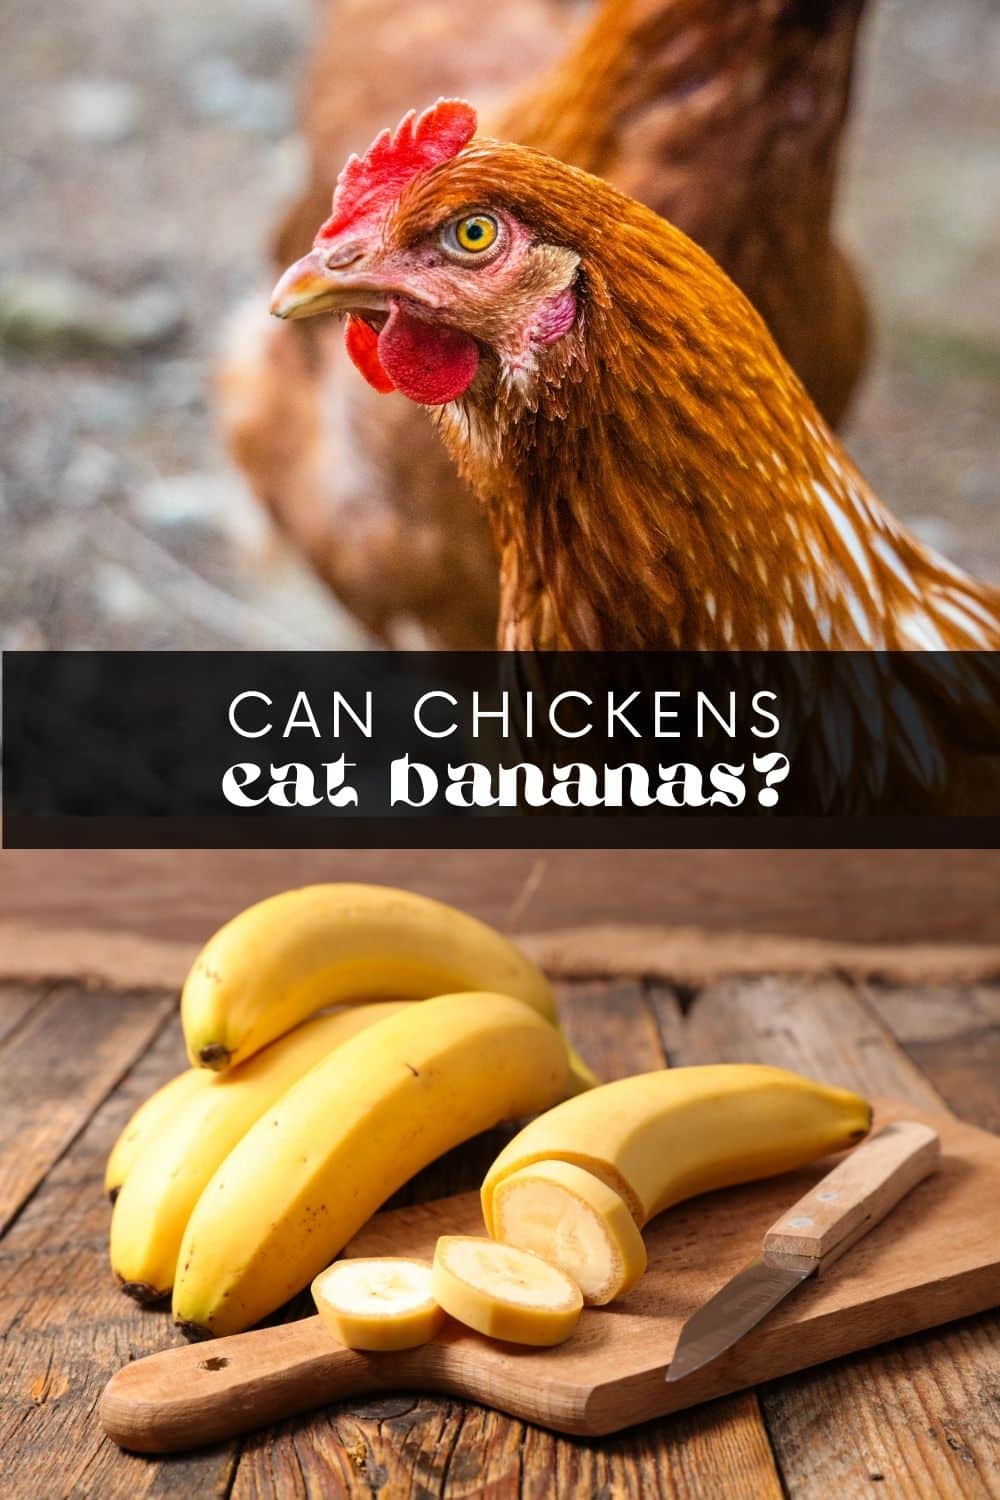 Chickens aren't known to be picky eaters, and will happily peck at almost anything you offer them. But can chickens eat bananas? The short answer is yes, they can! However, there are a few things to consider when feeding bananas to your flock.